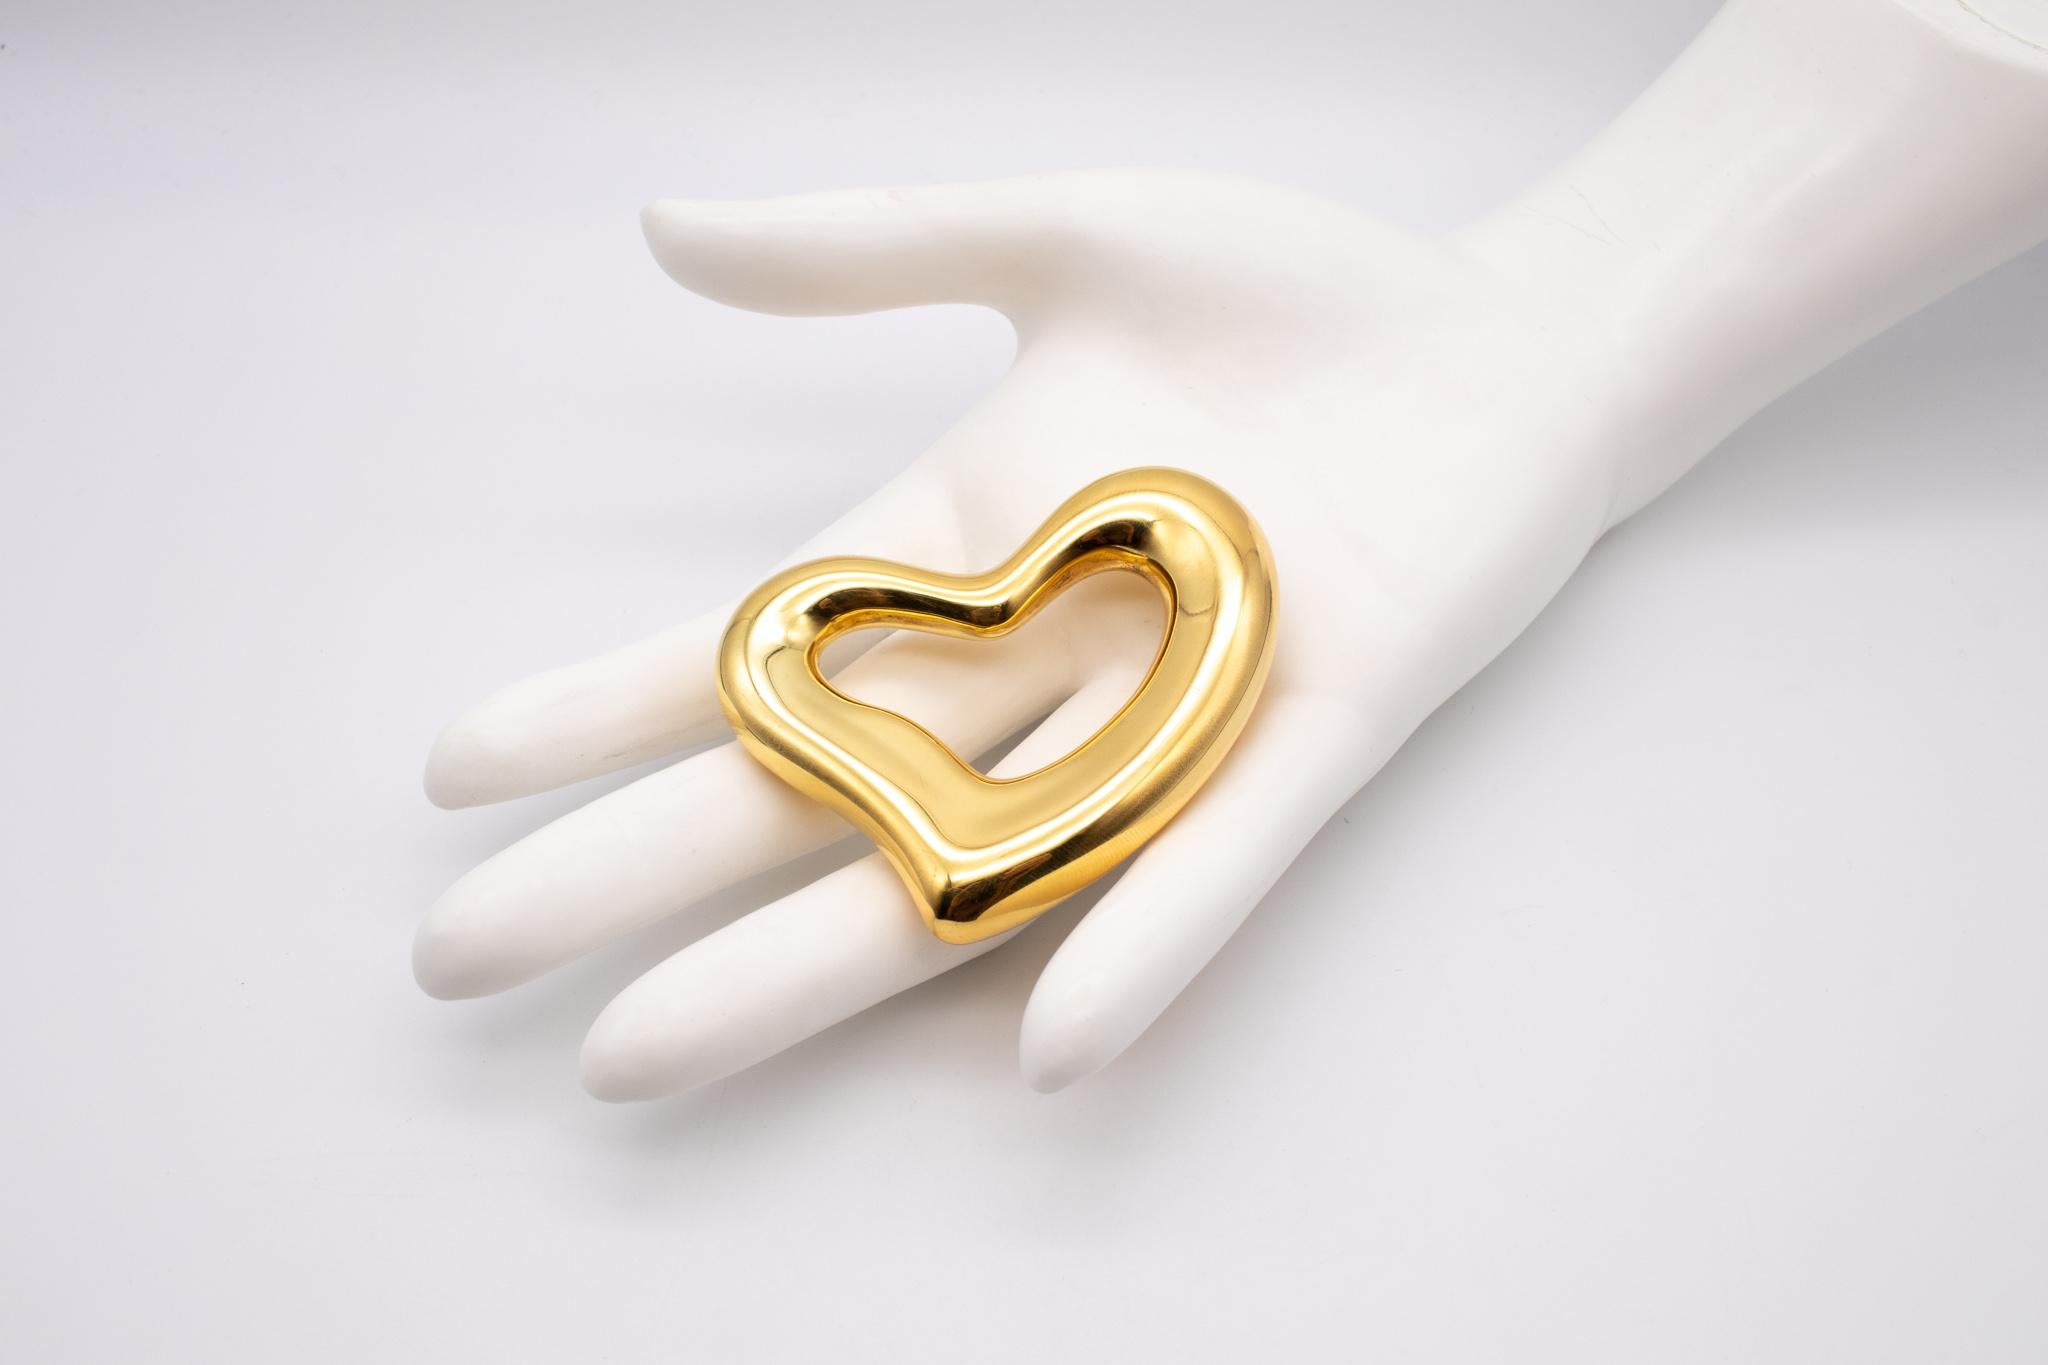 Heart pendant designed by Elsa Peretti (1940-2021) for Tiffany & Co.

Fabulous oversized piece, created by the iconic jewelry artist Elsa Peretti for Tiffany & Co. studios, back in the 1975. This sculptural unusual piece has been crafted in the